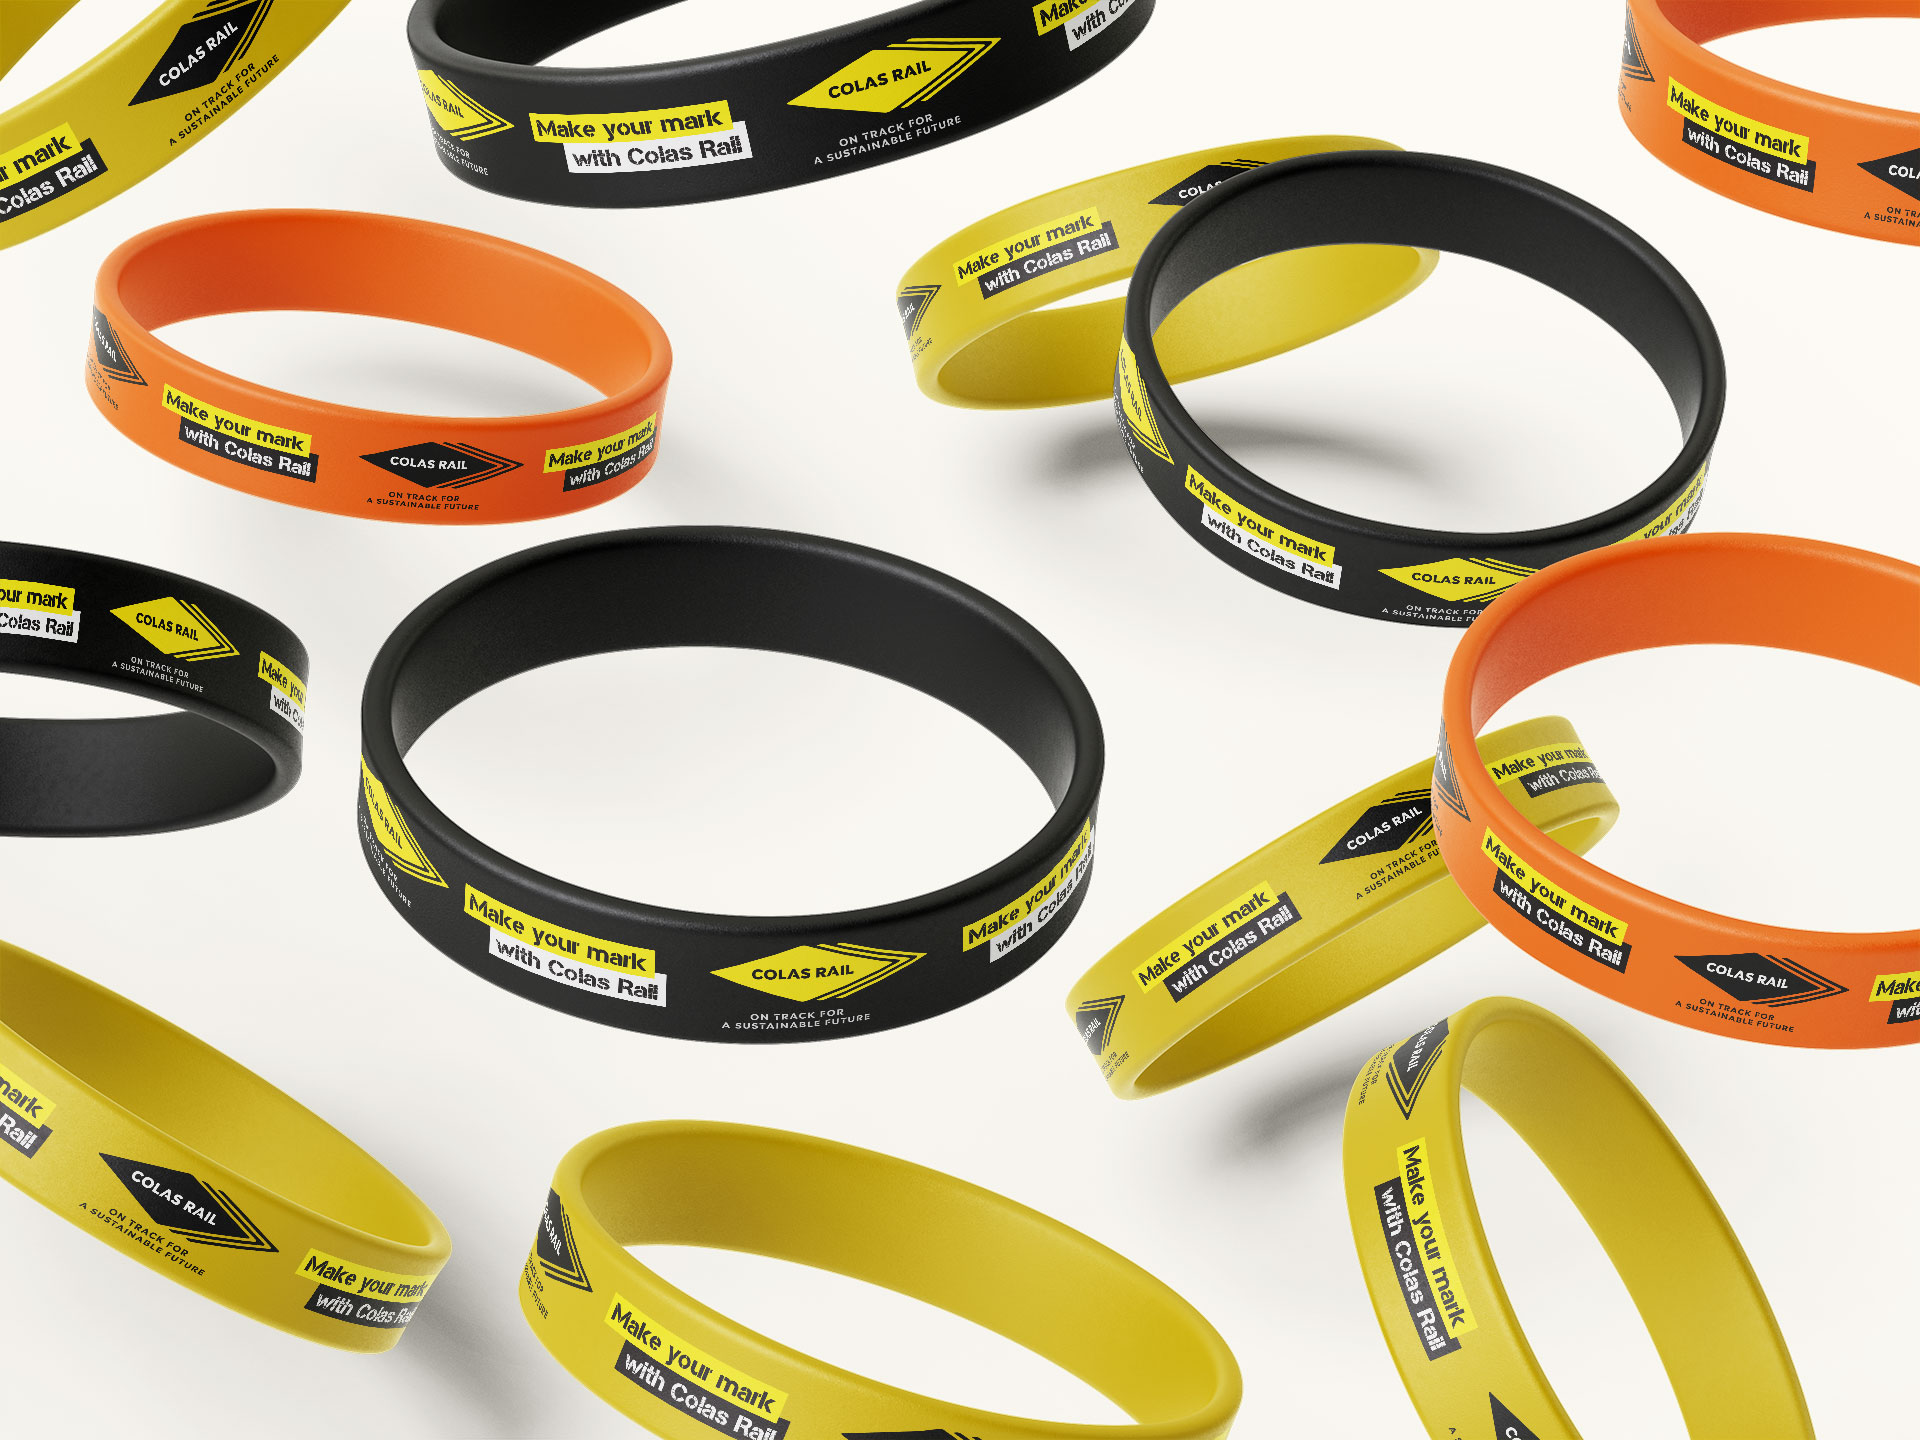 An image to show how the Colas Rail branding can look on different coloured wristbands.